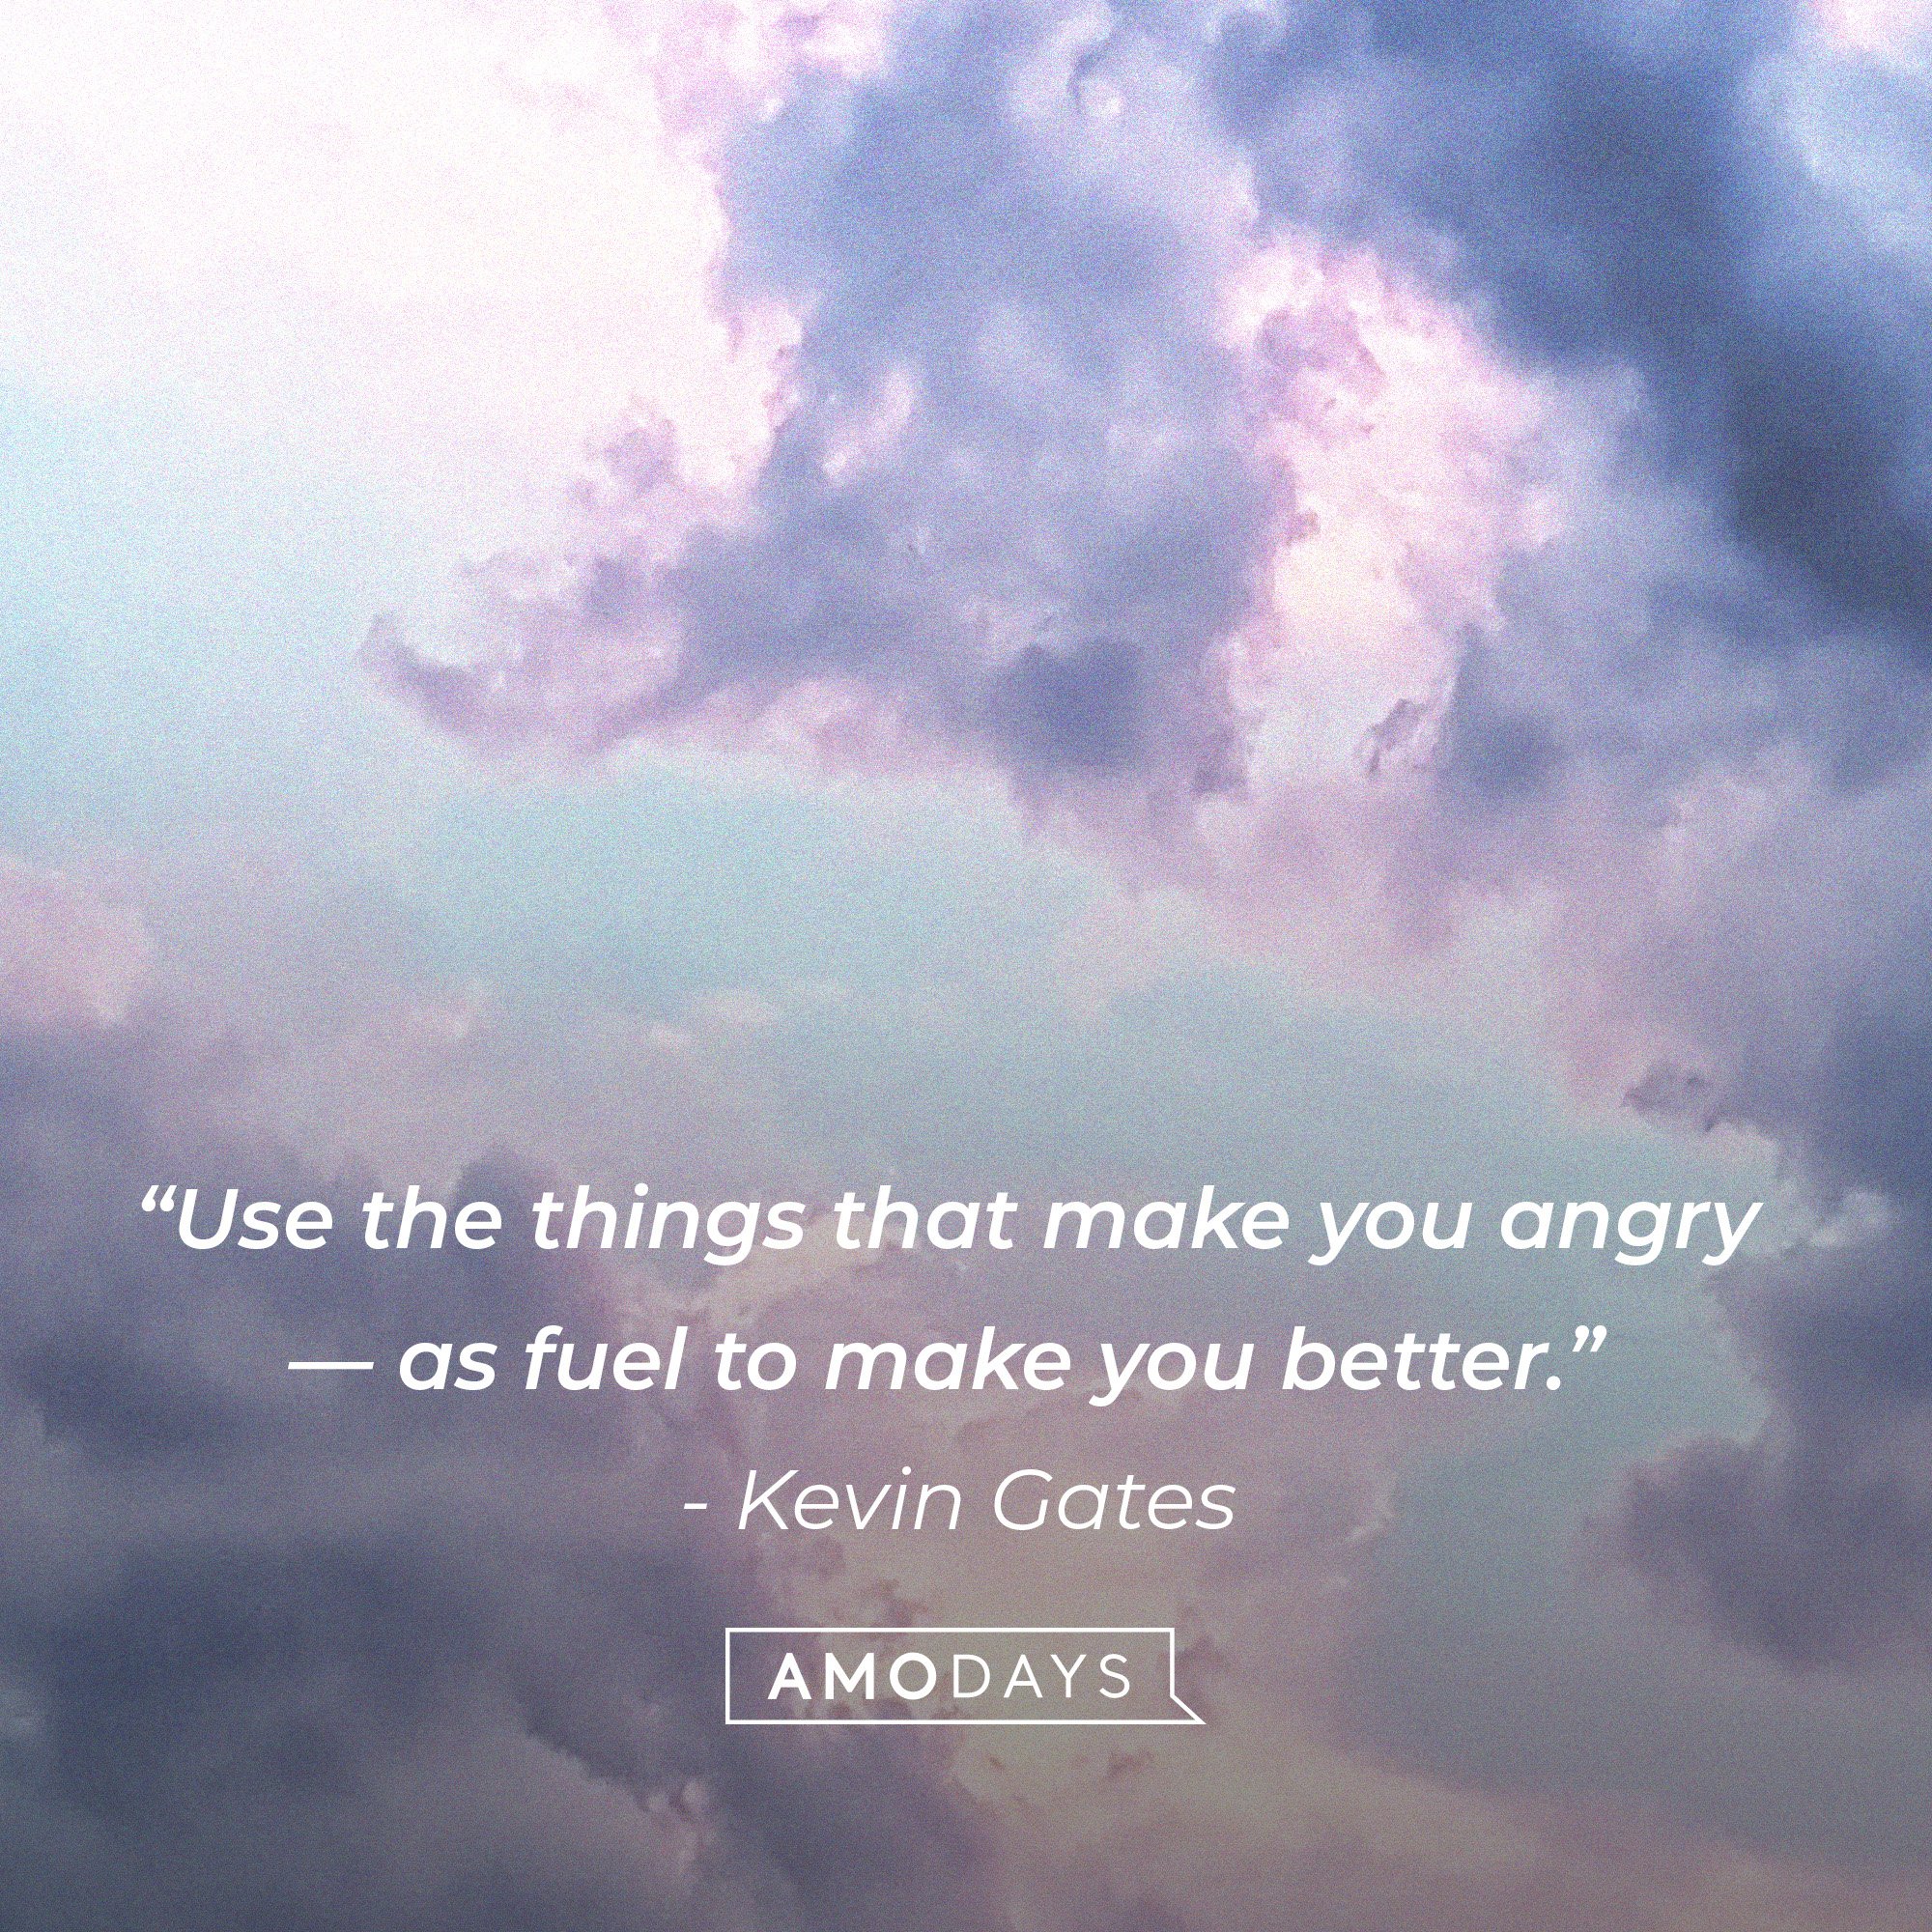 Kevin Gates’ quote: “Use the things that make you angry — as fuel to make you better.” |  Image: AmoDays